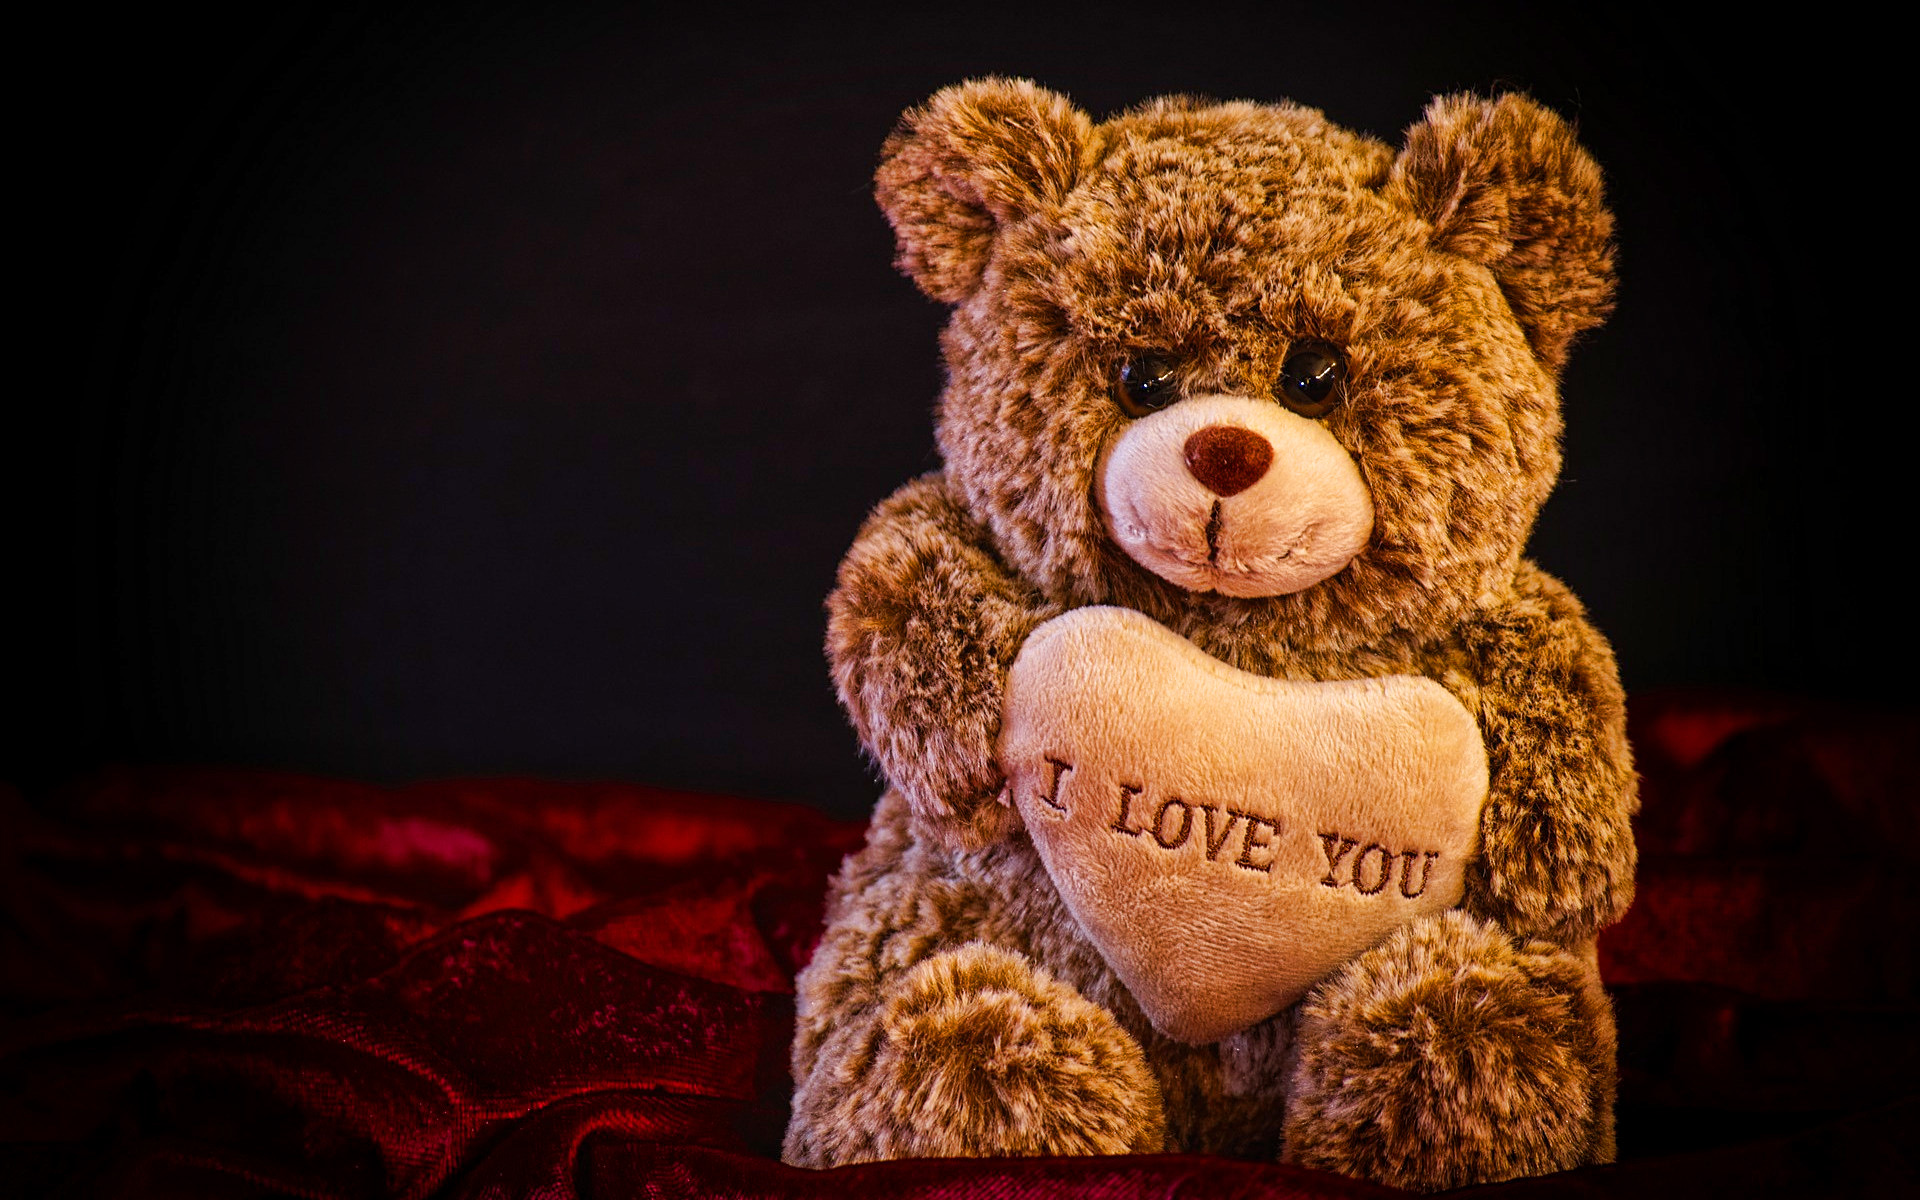 Download wallpapers I Love You, 4k, teddy bear, love concepts, soft toys,  teddy bear with heart for desktop with resolution 1920x1200. High Quality  HD pictures wallpapers